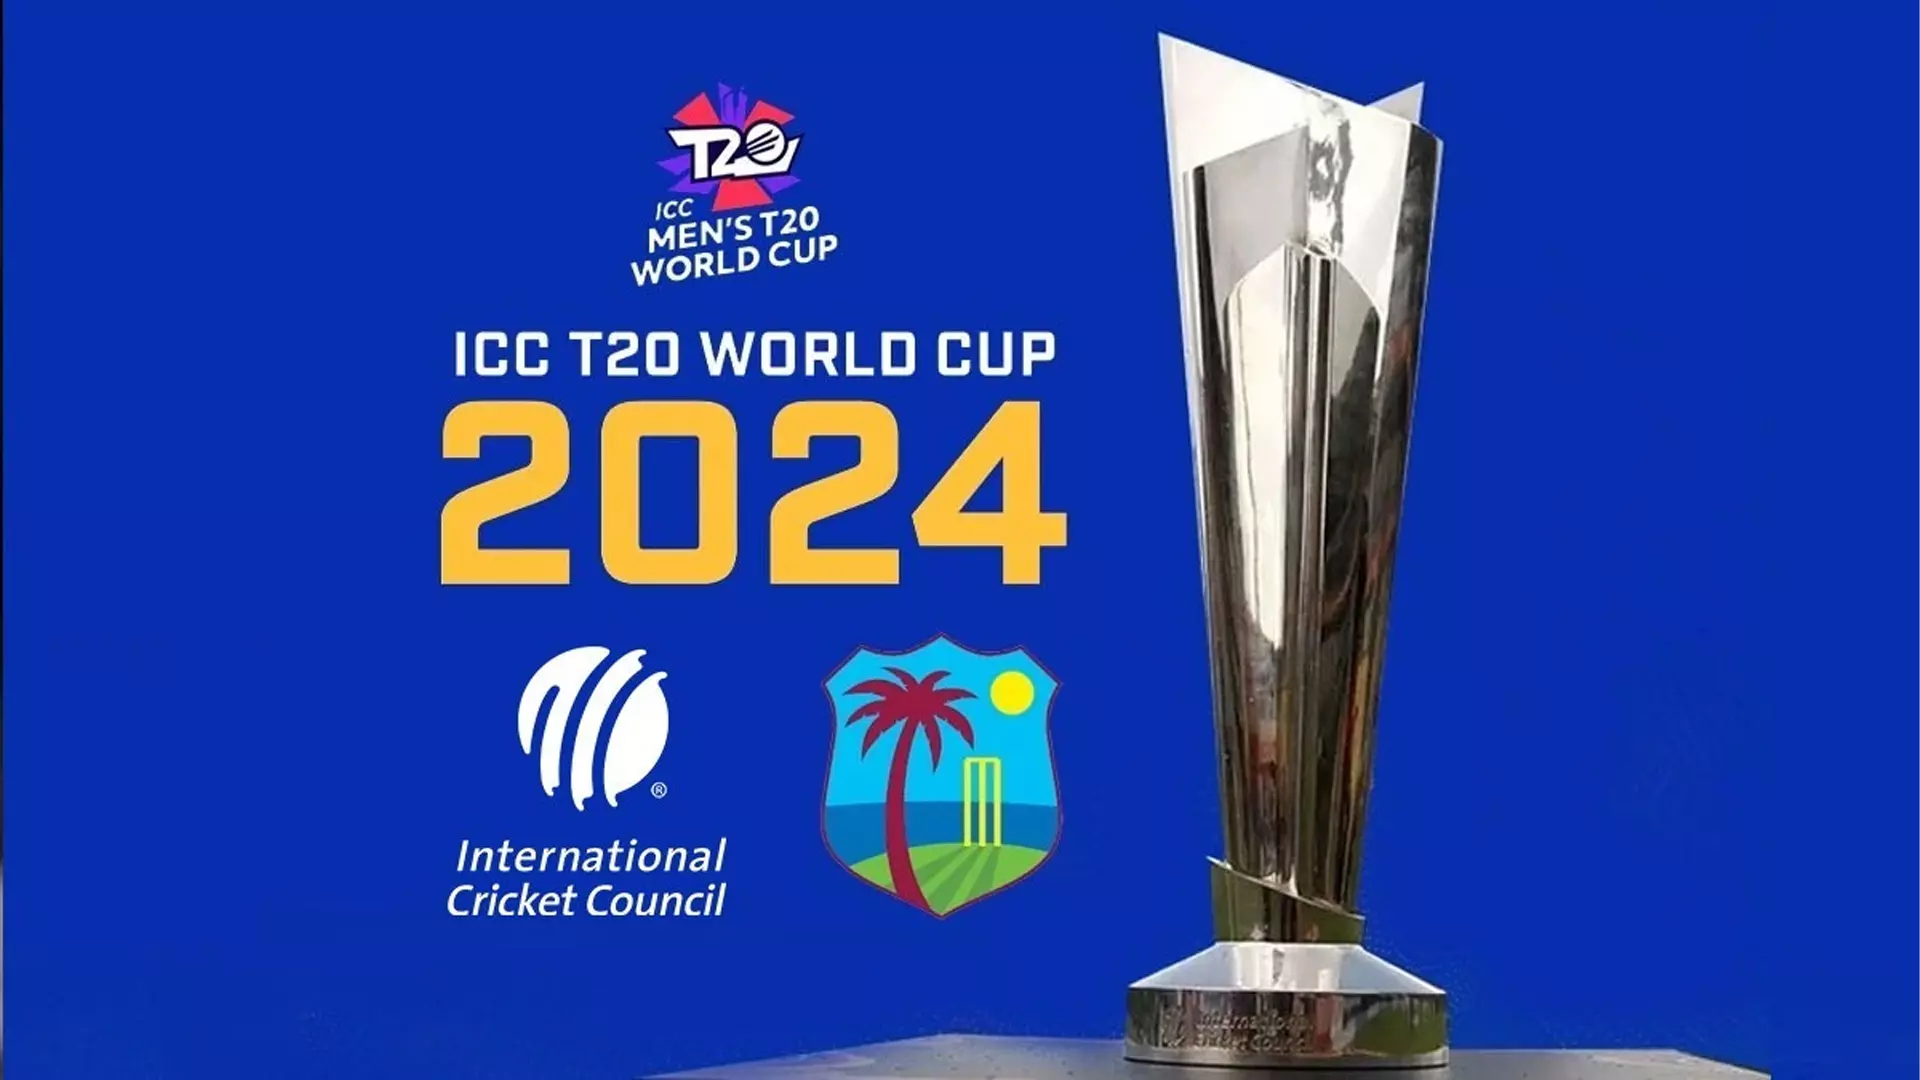 ICC to announce New York as venue for 2024 Mens T20 World Cup matches Report IndiaPost NewsPaper